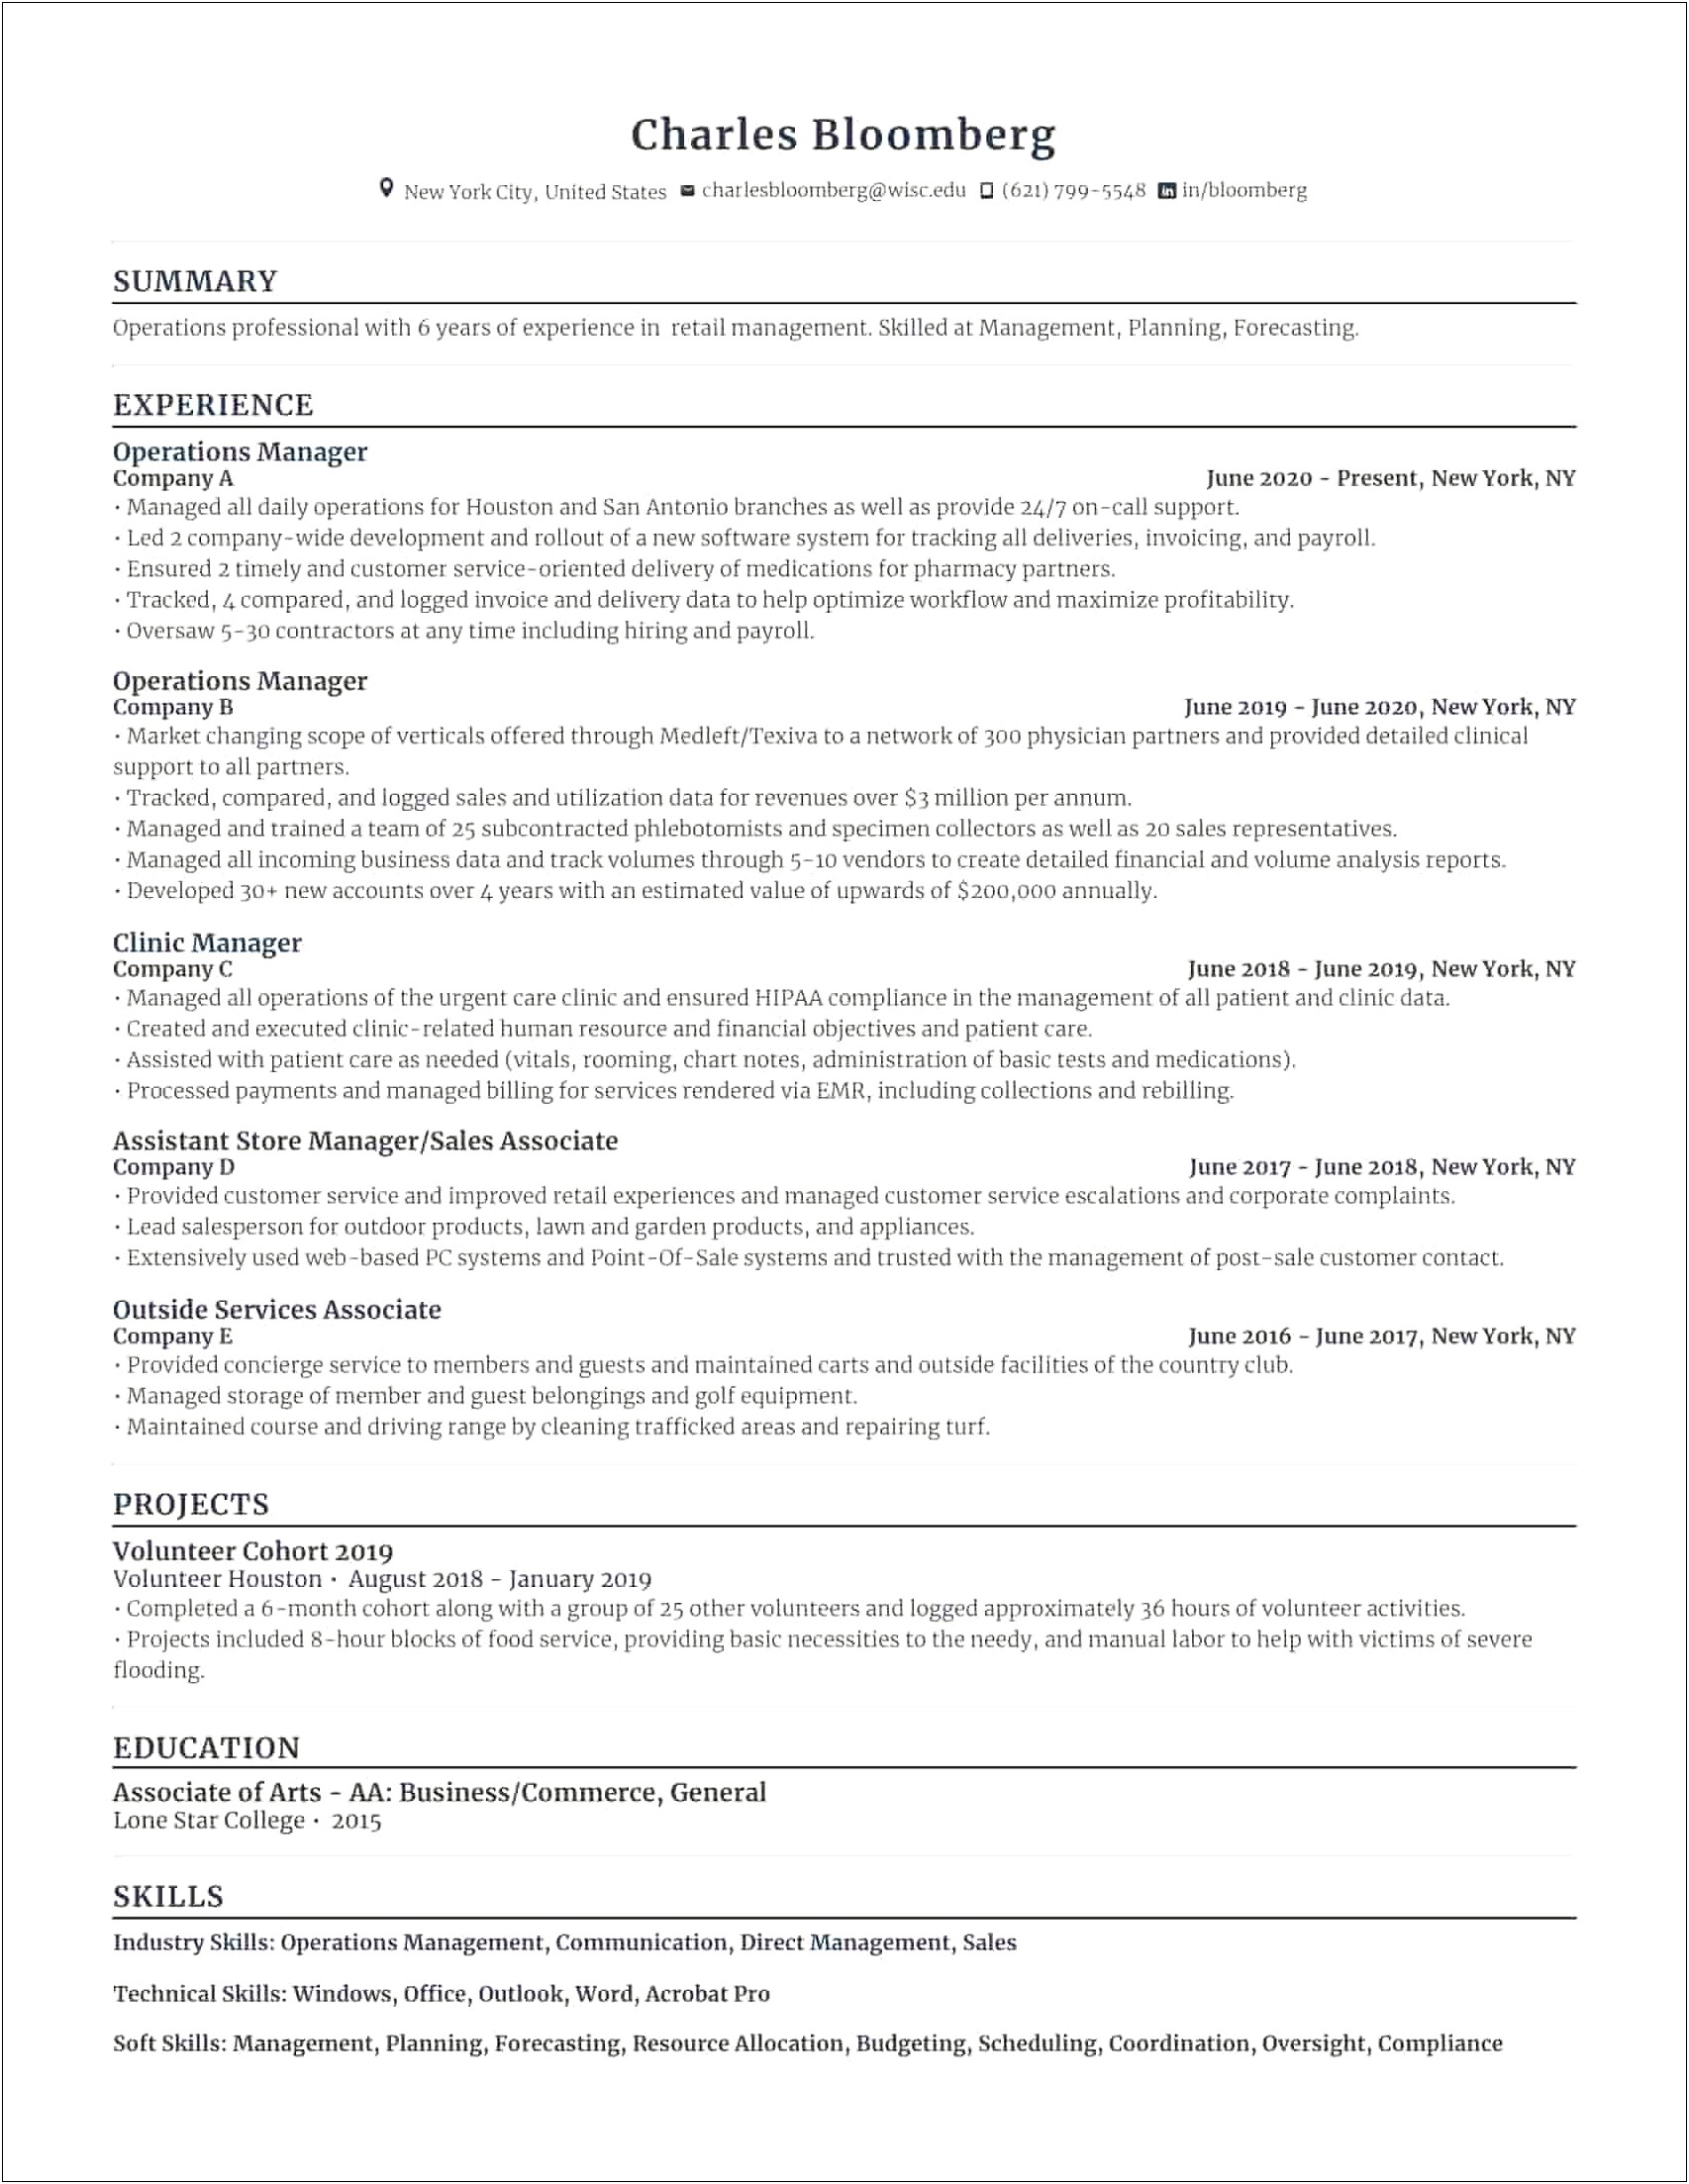 Area Of Expertise Resume Operations Manager